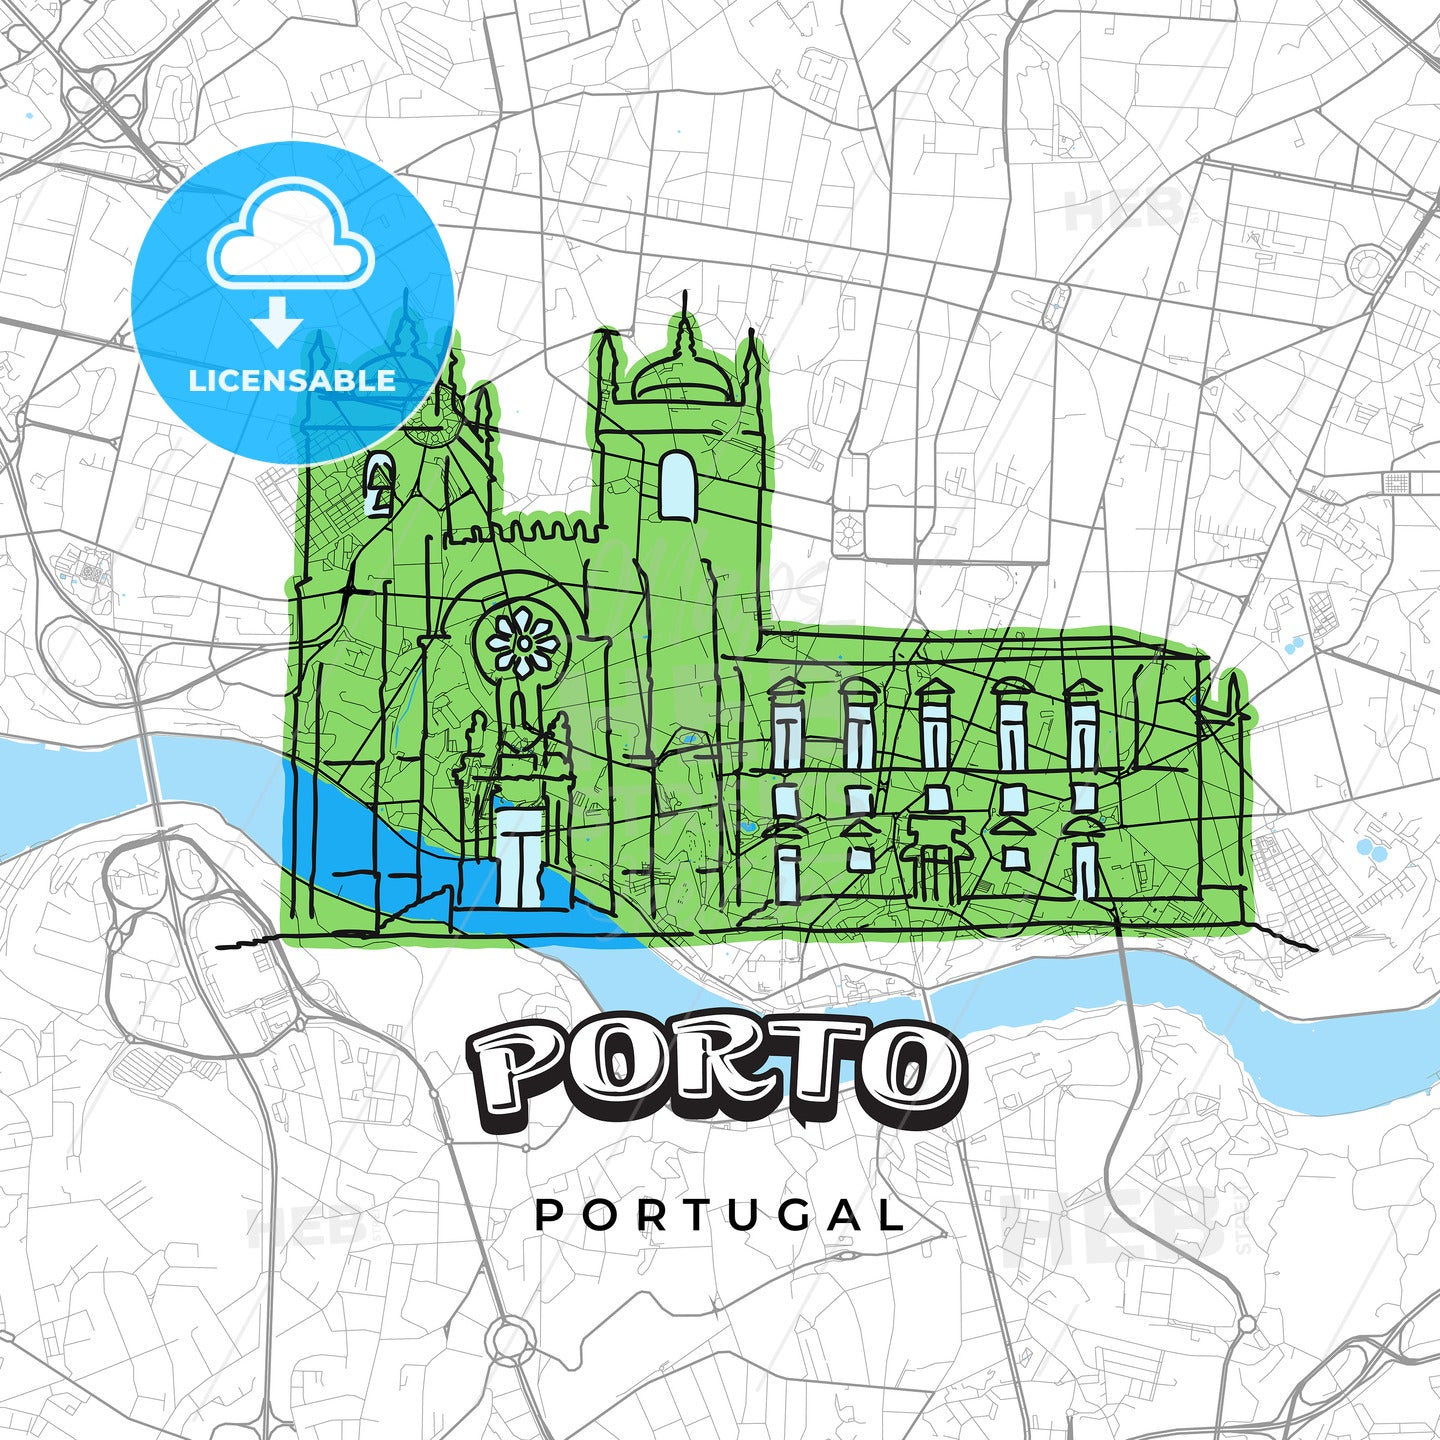 Porto Portugal drawing on map